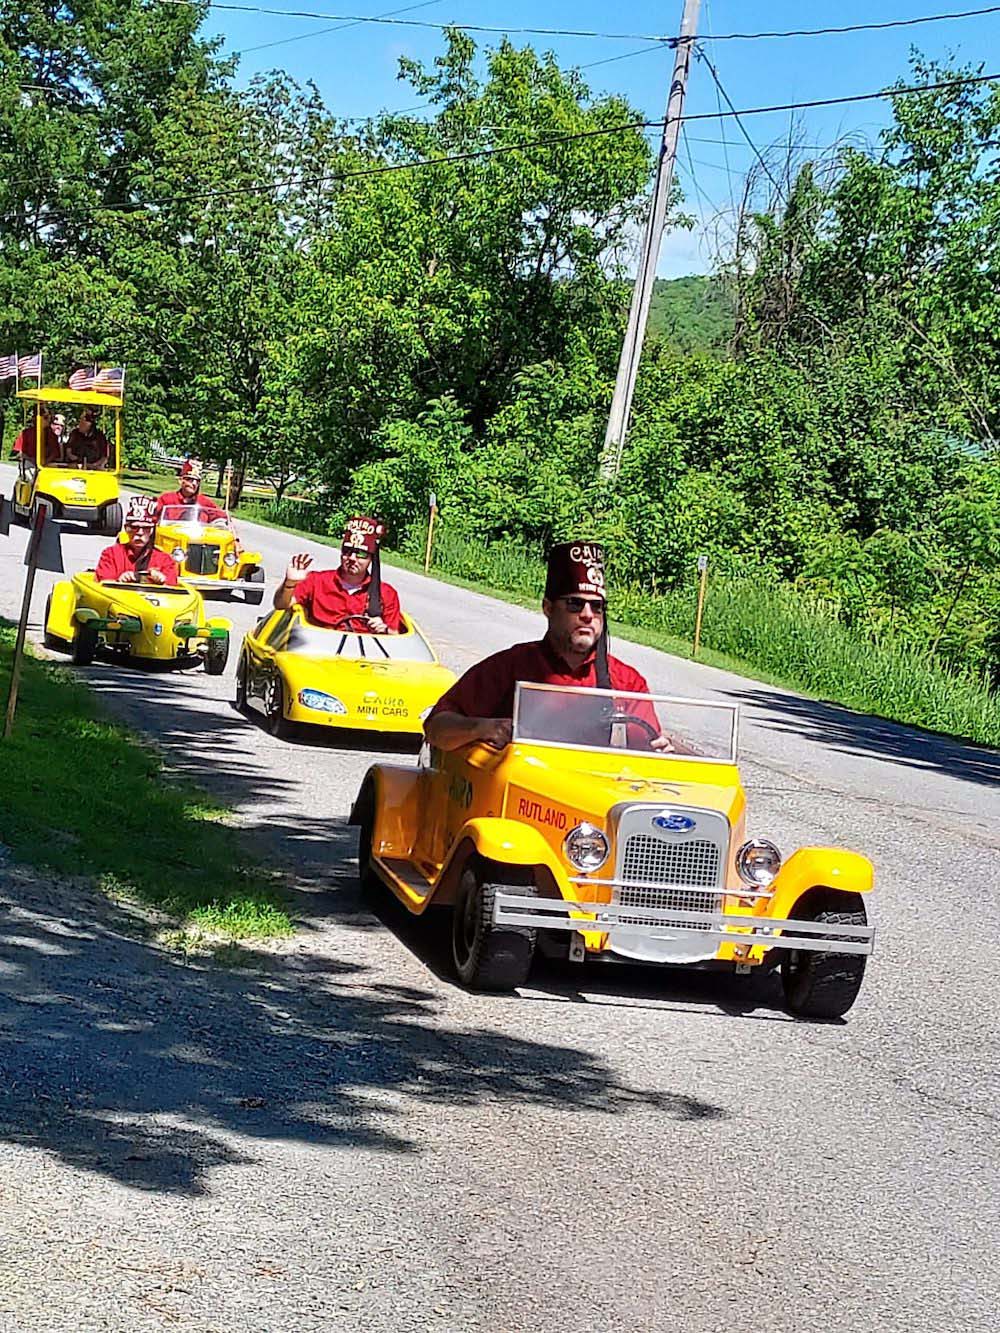 Orwell village gears up for Memorial Day parade - Addison Independent